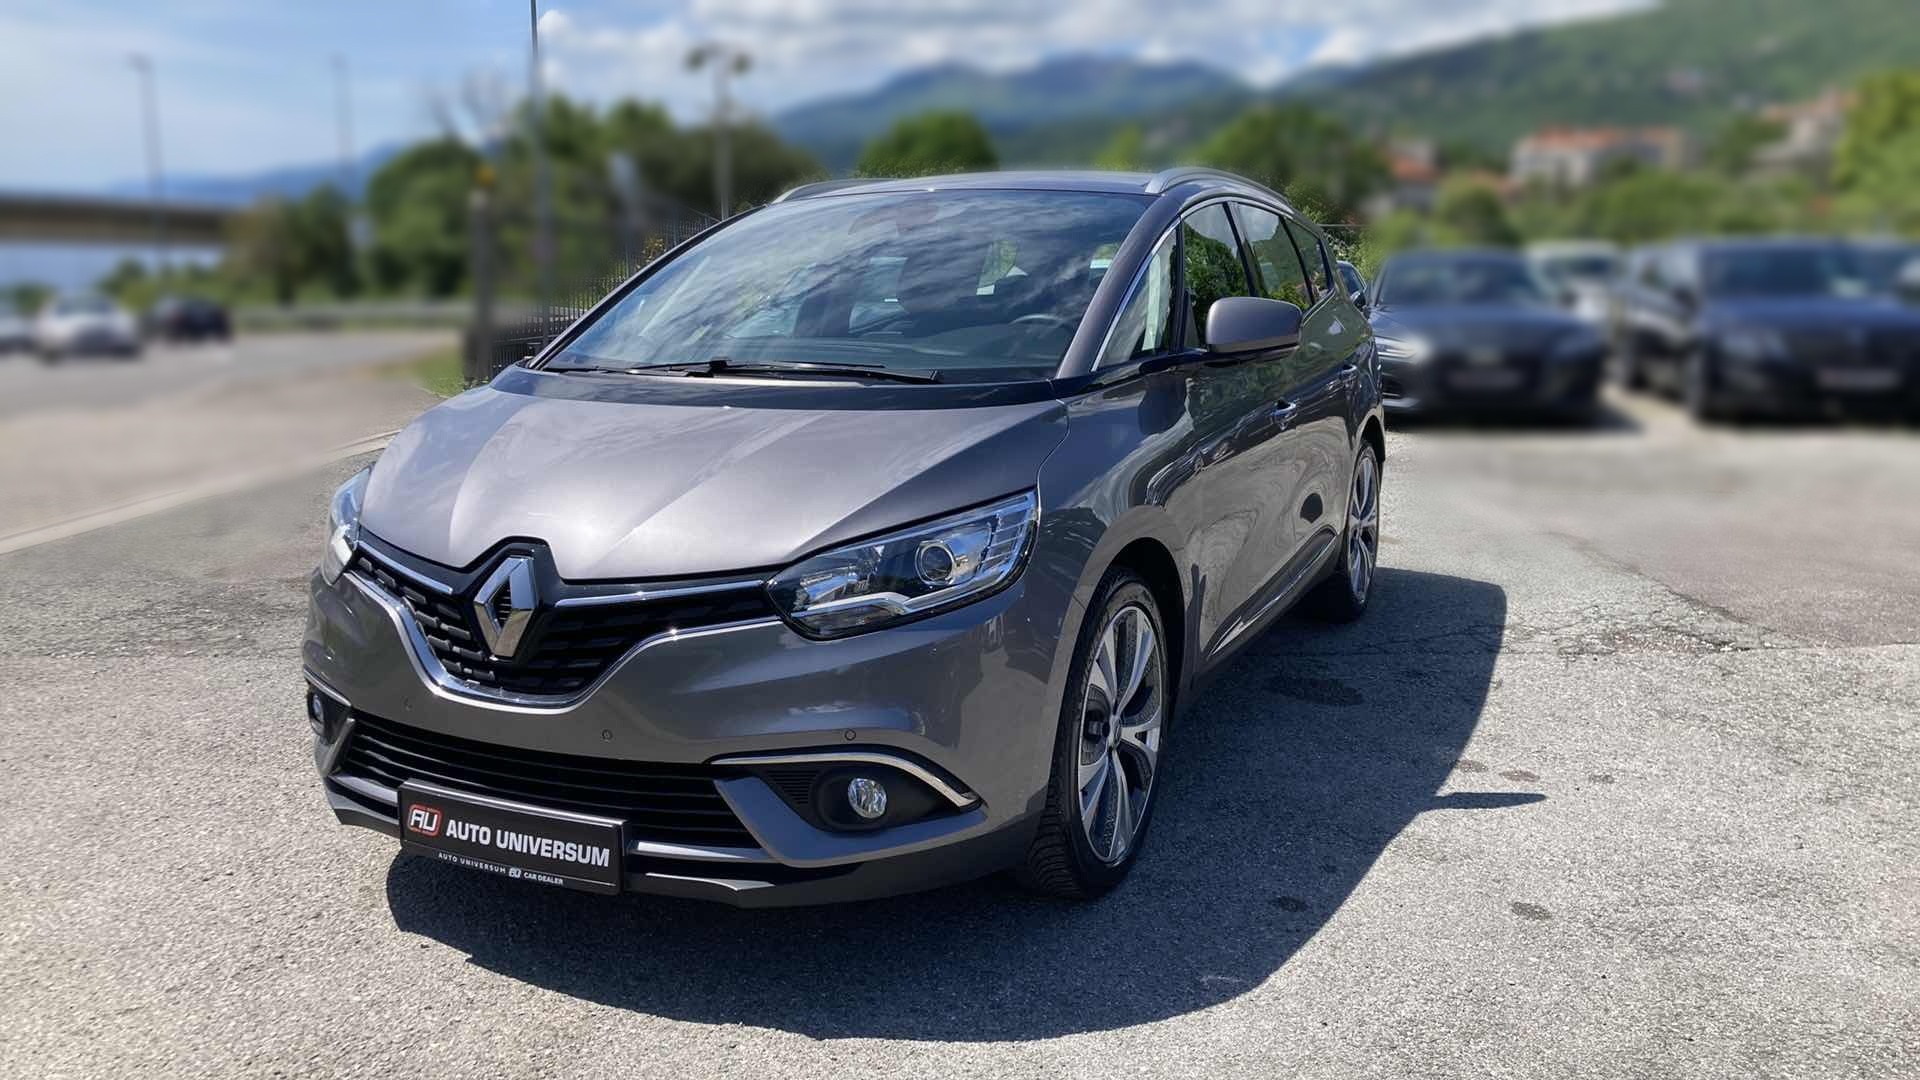 Scénic dCi 110 Energy Intens 93,681 19.500 € | NEOSTAR